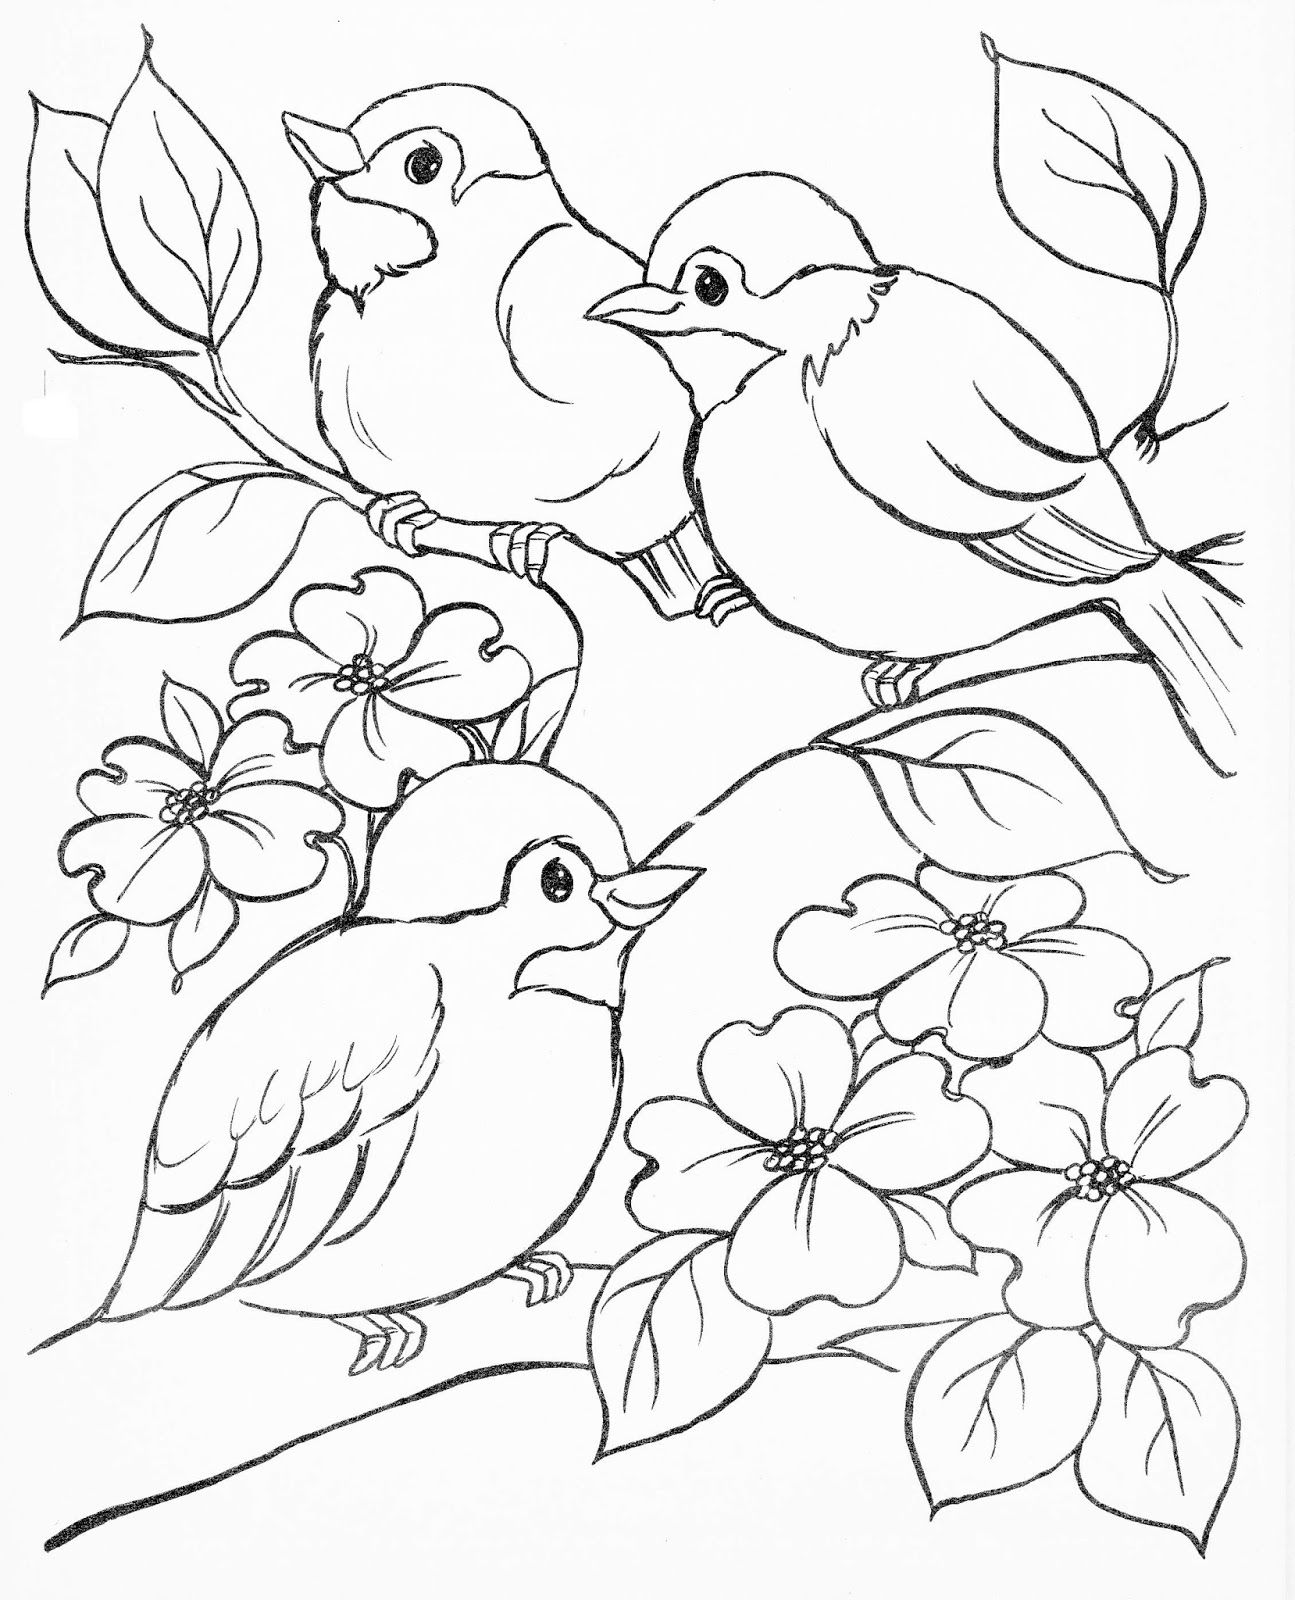 Bless This Day Bird drawings, Bird coloring pages, Bird coloring